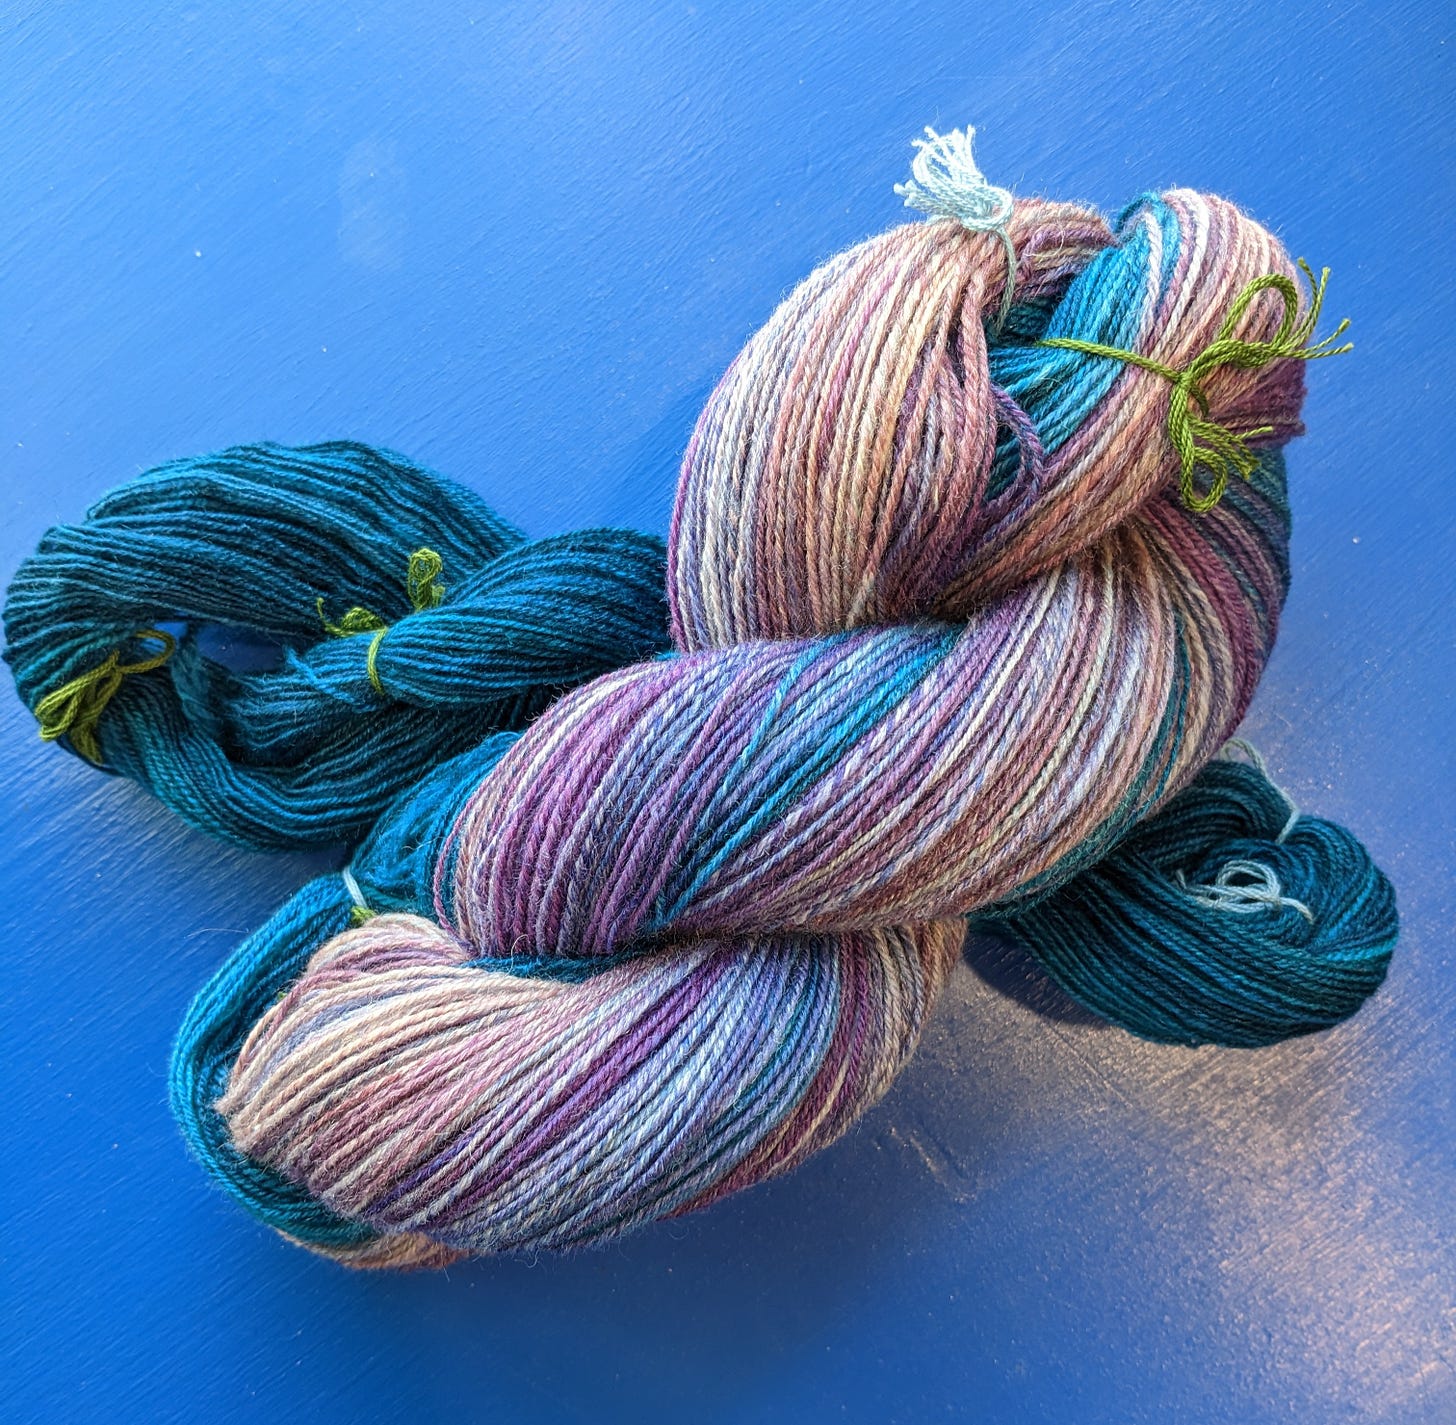 Two skeins of yarn (one dark teal, one an ombre from dark teal to peachy purple tones) on a blue background.